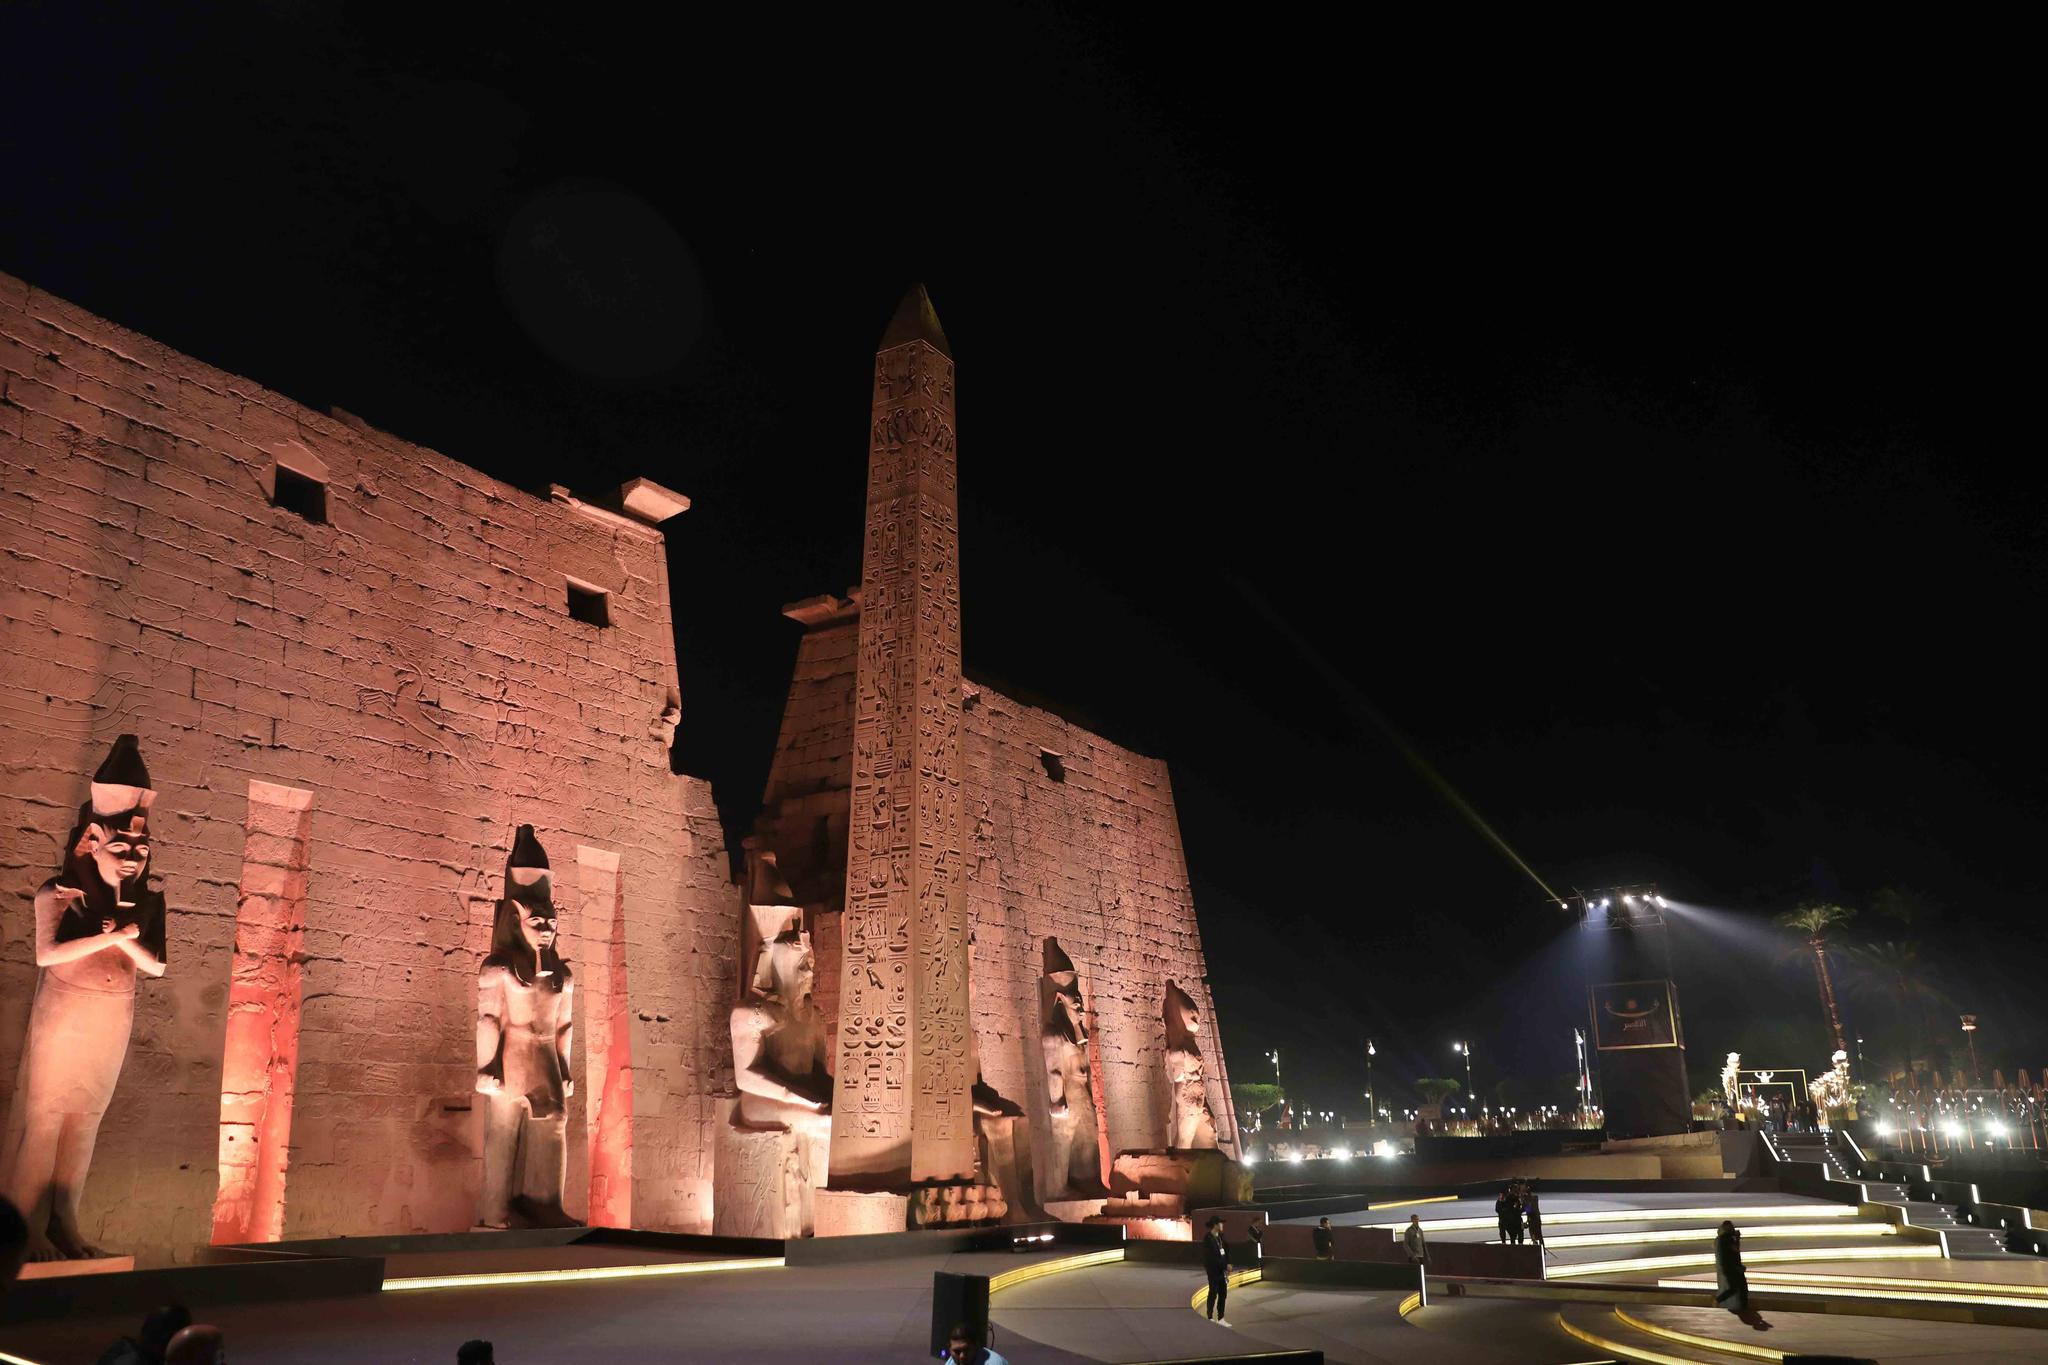 A view of the entrance of the Temple of Luxor ahead of the reopening ceremony of the Avenue of Sphinxes commonly known as El Kebbash Road on Thursday, Nov. 25, 2021 in Luxor, Egypt.